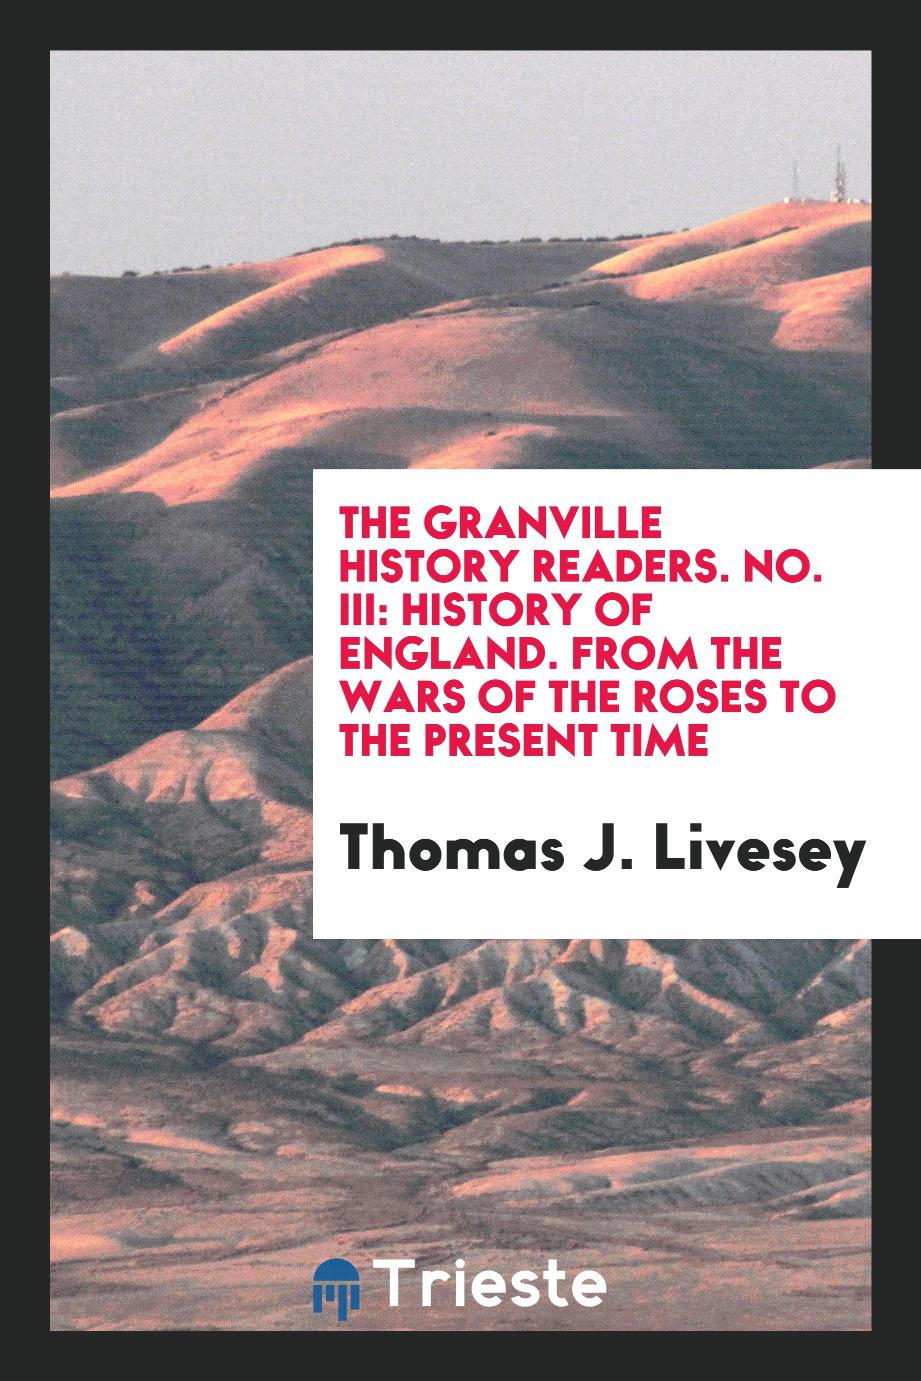 The Granville History Readers. No. III: History of England. From the Wars of the Roses to the Present Time